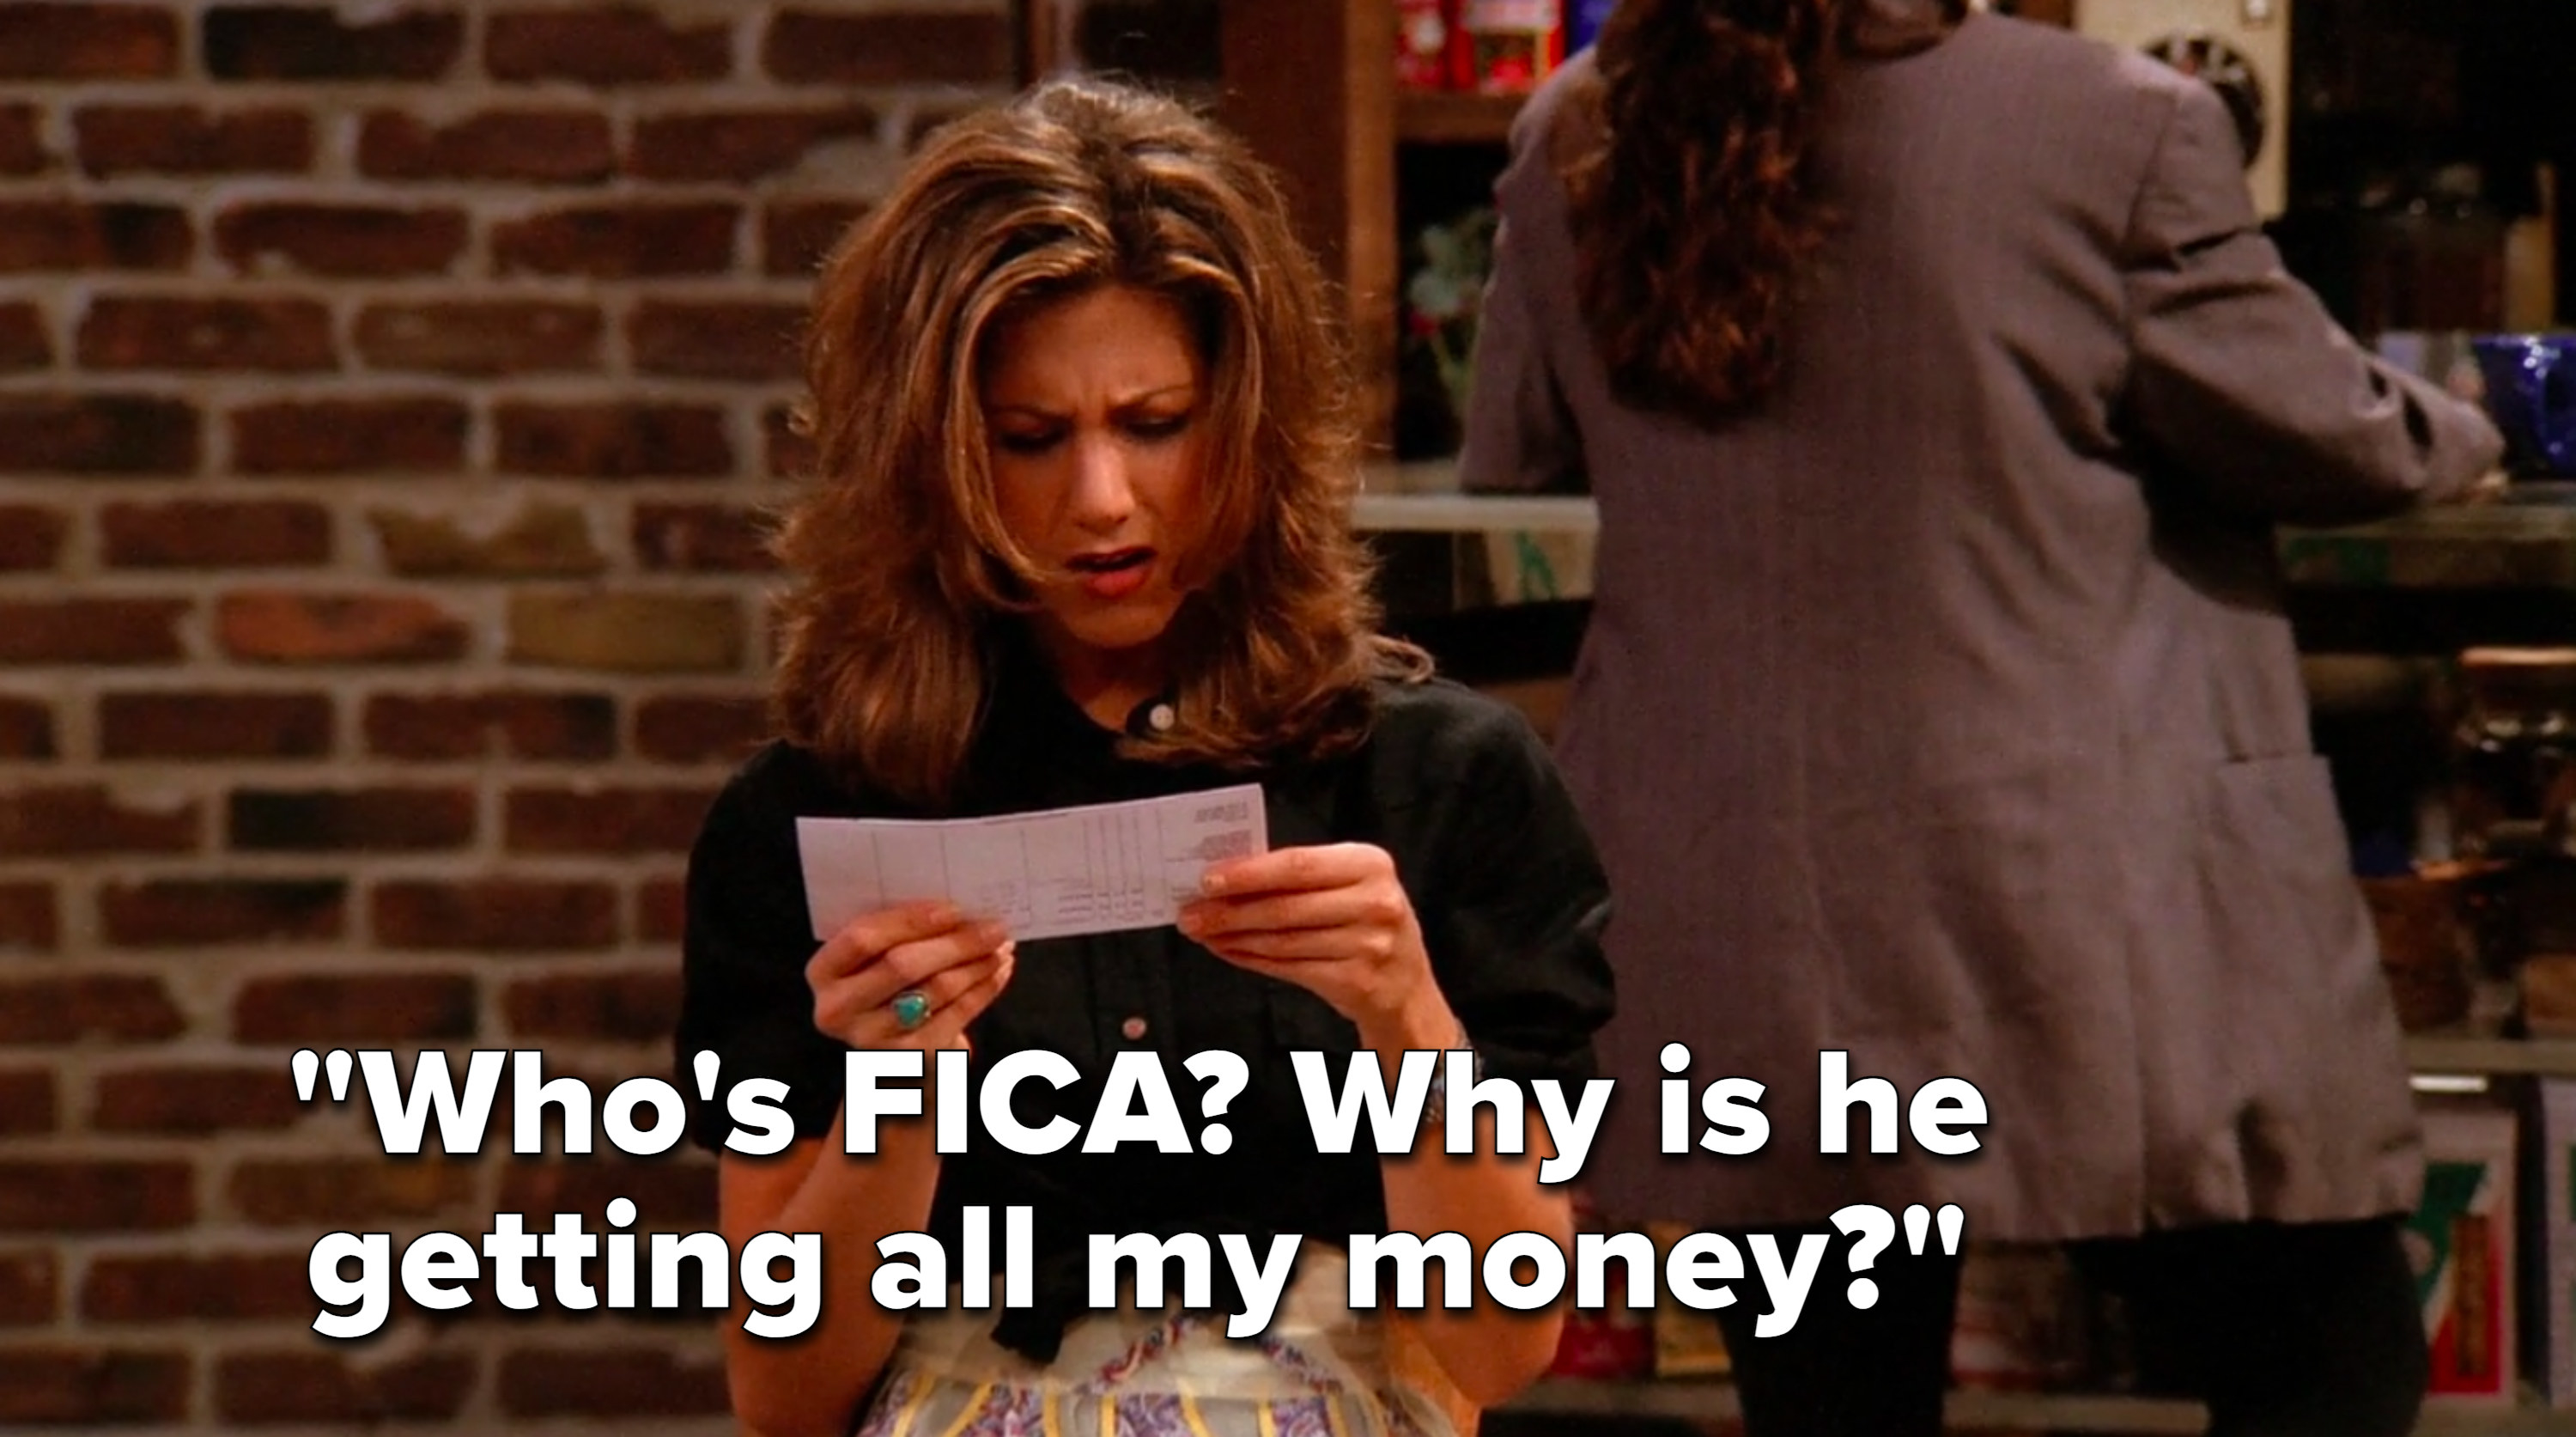 Rachel says, Who is FICA, Why is he getting all my money